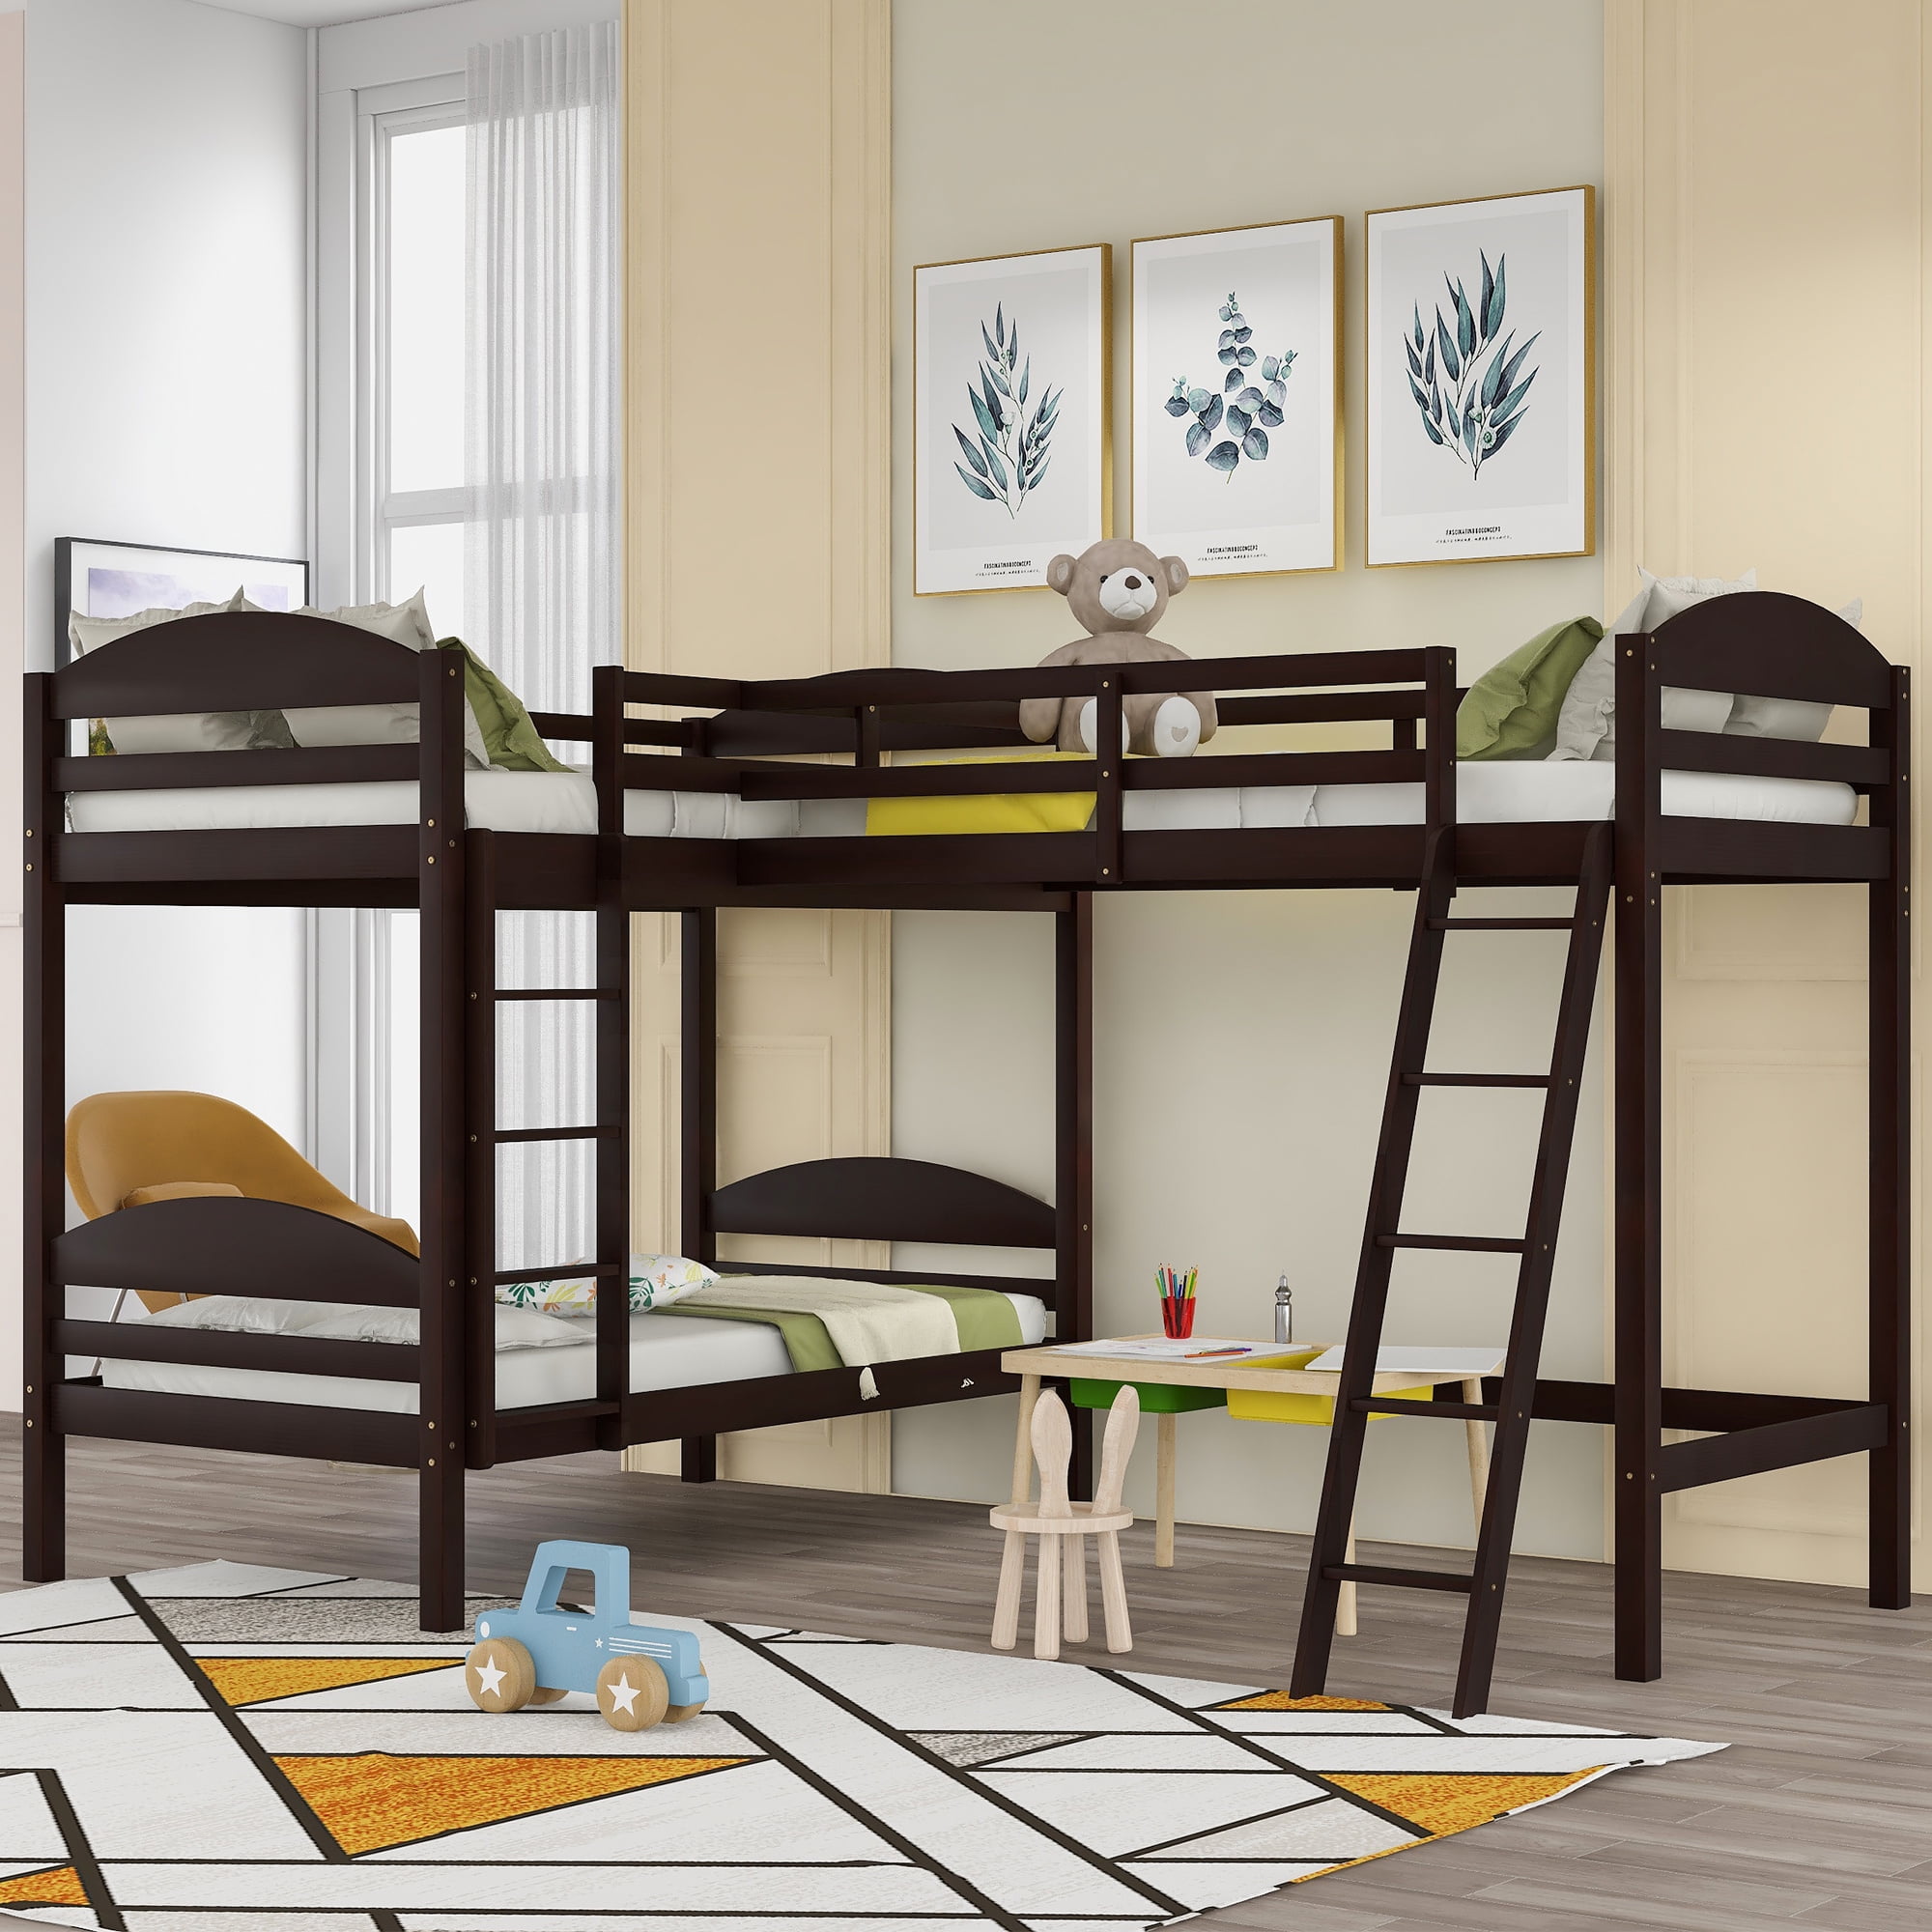 Twin Over Bunk Beds For Kids, L Shaped Triple Bunk Beds Uk